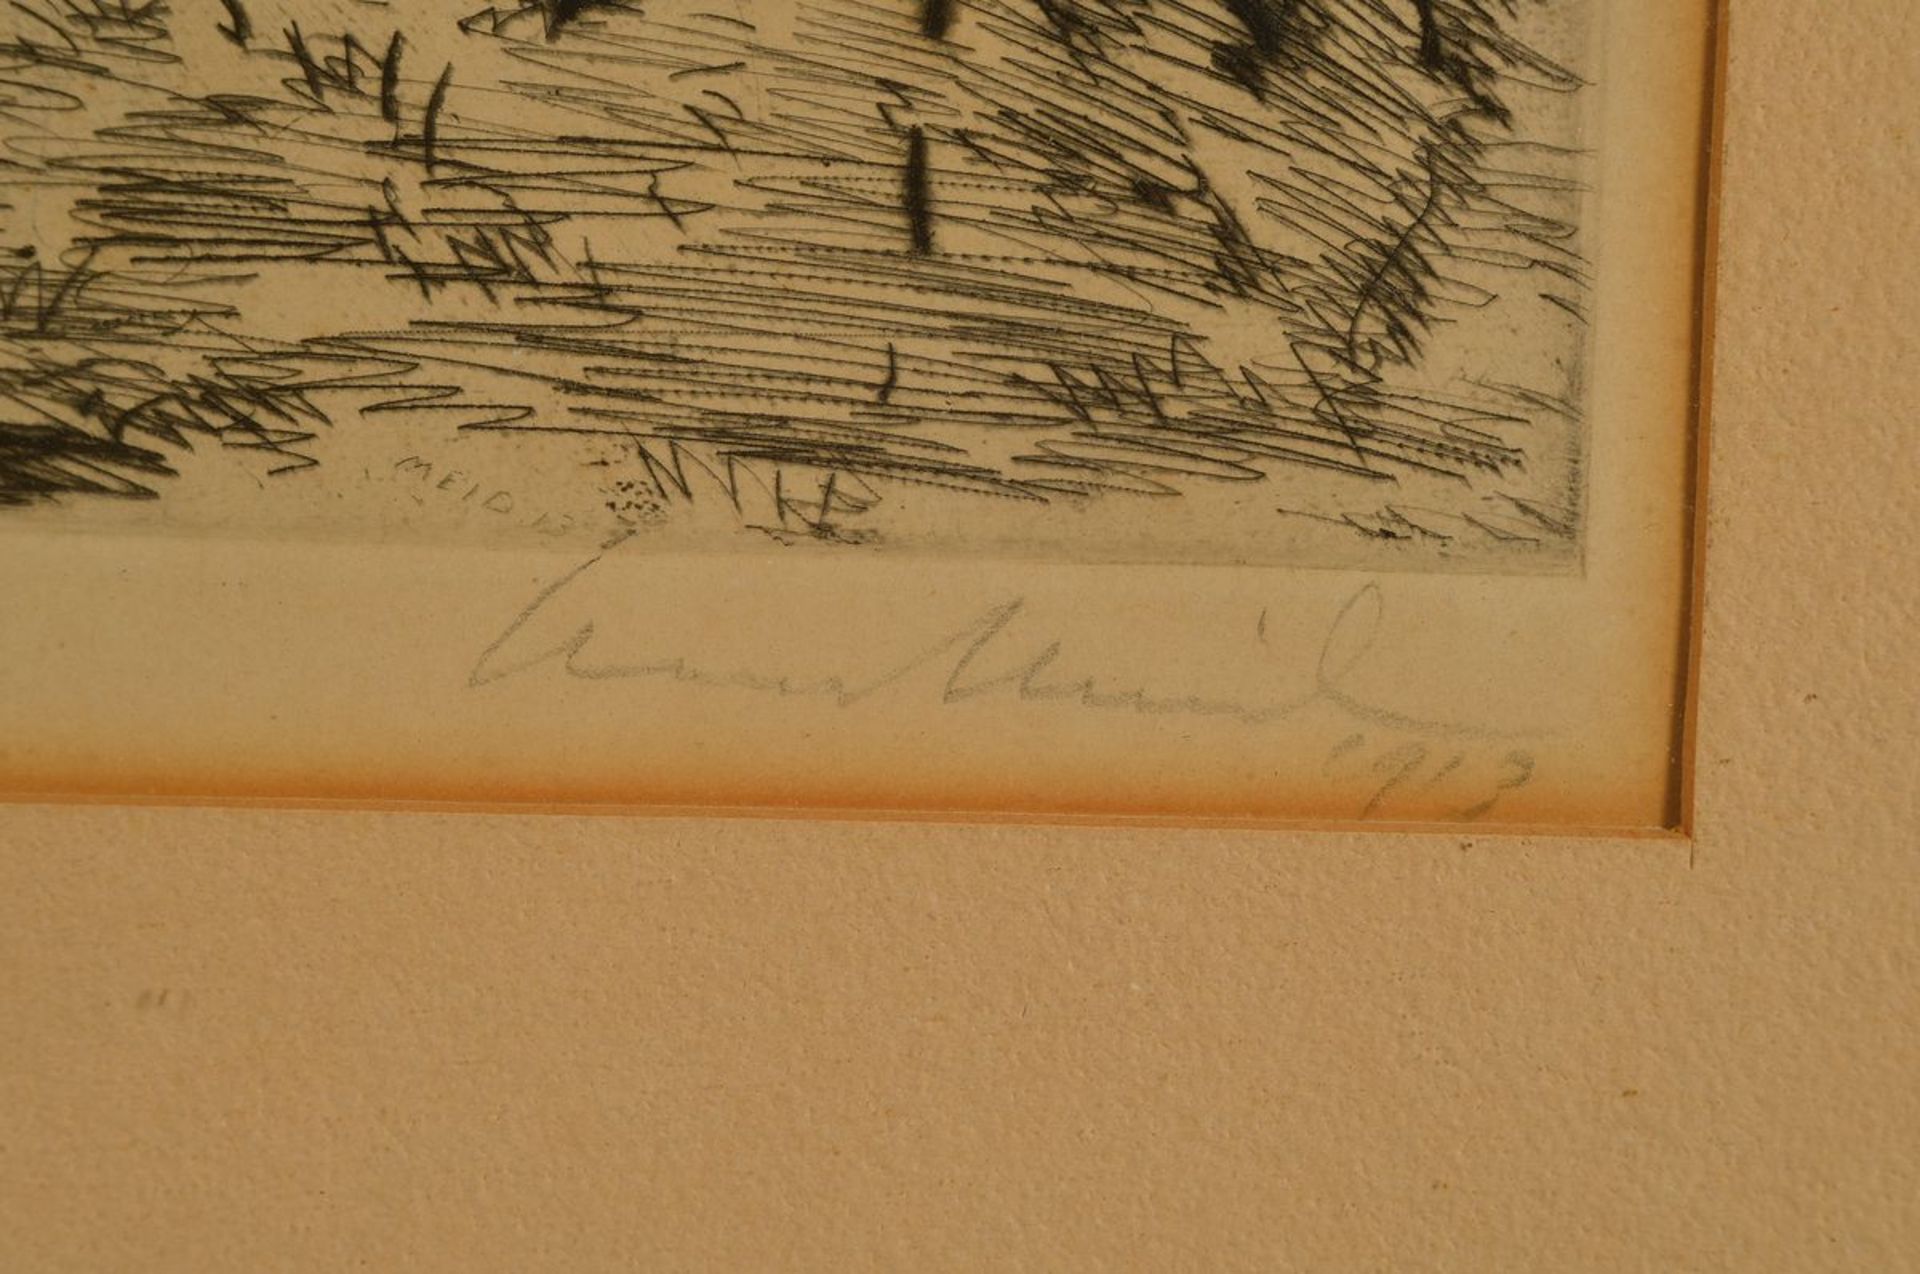 Hans Meid, 1883 Pforzheim-1957 Ludwigsburg, lovers, Etching of 1917, handsigned, dated and titled, - Image 2 of 3